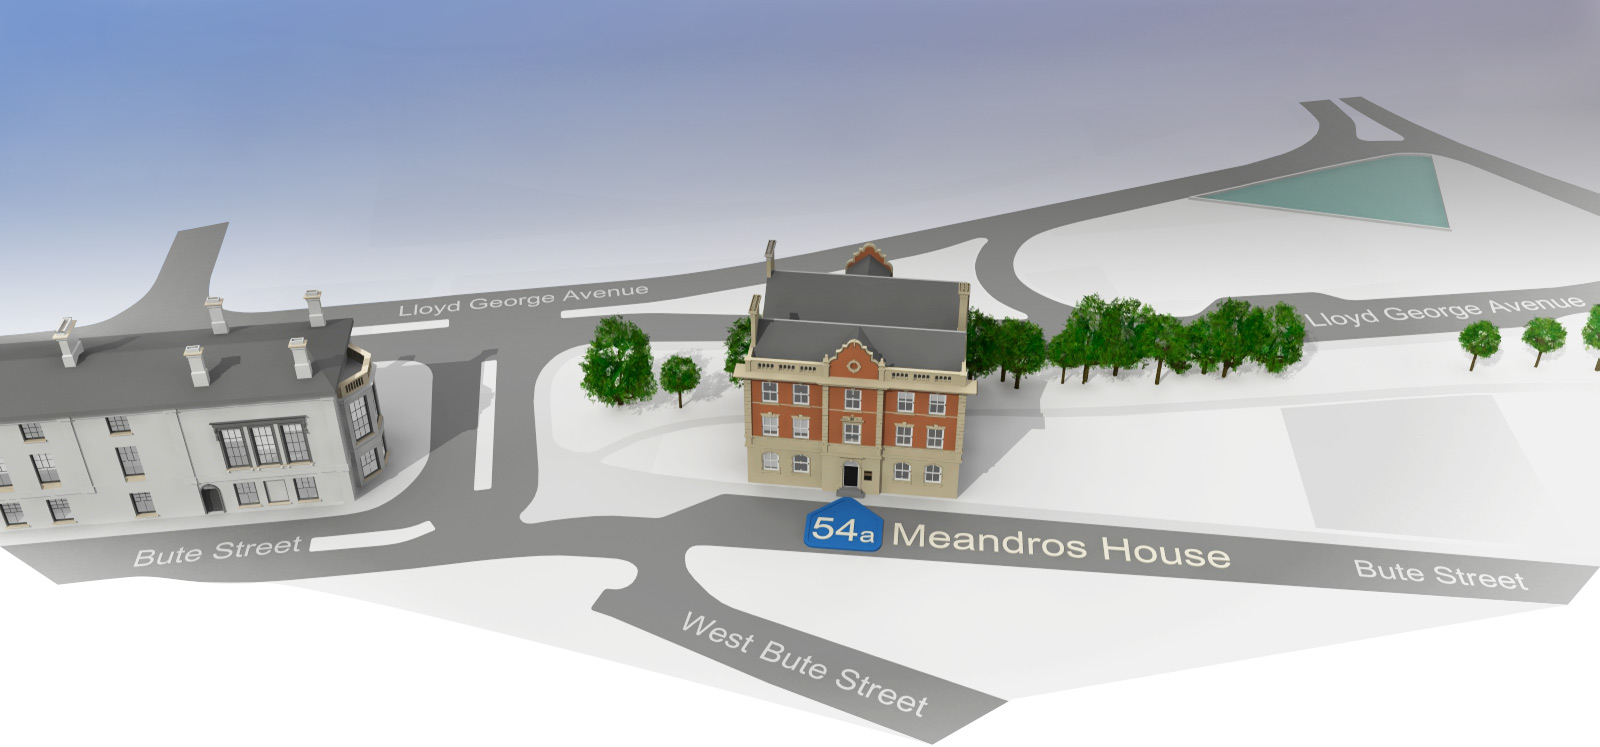 Meandros House, Bute Street